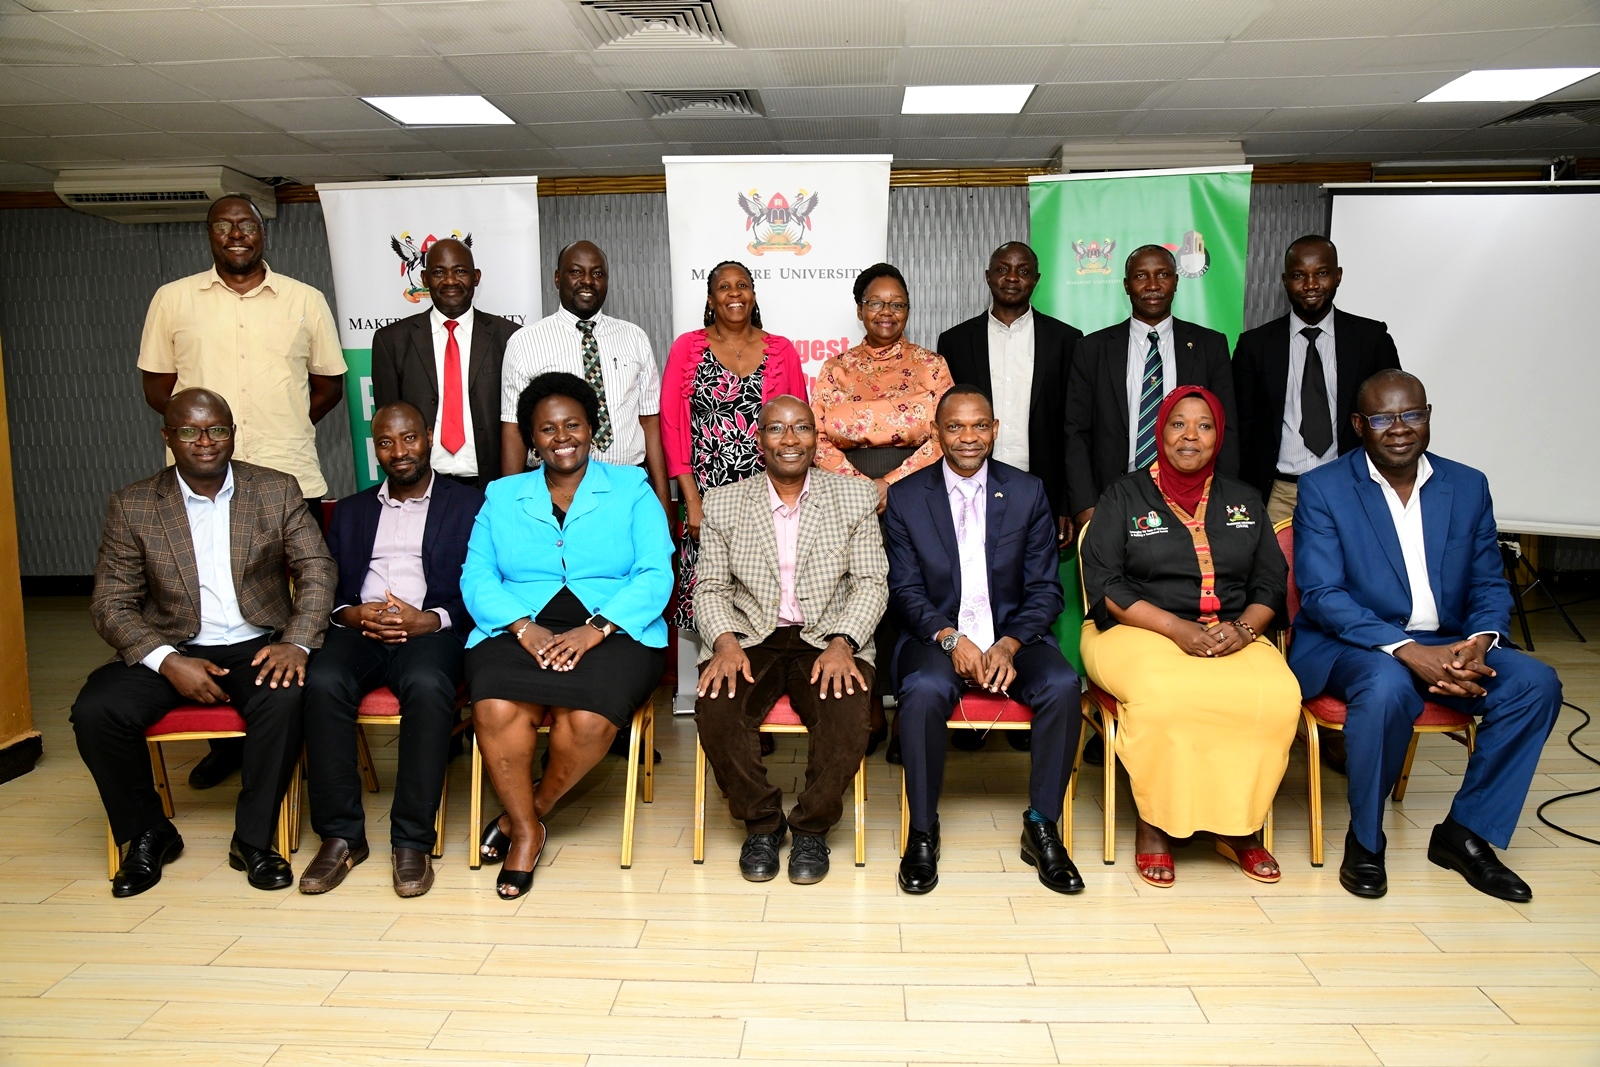 Seated: The DVCAA & Patron MUDF-Prof. Umar Kakumba (3rd R), with the Chairperson-Prof. Arthur K. Tugume (C), Vice Chairperson-Prof. Saudah Namyalo and Members L-R; Dr. Justus Twesigye, Dr. Martin Baluku, Dr. Claire Mugasa and Prof. Godfrey Akileng as well as Deans and Directors (Standing) at the Forum on 28th September 2023, Hotel Africana, Kampala. Uganda, East Africa.